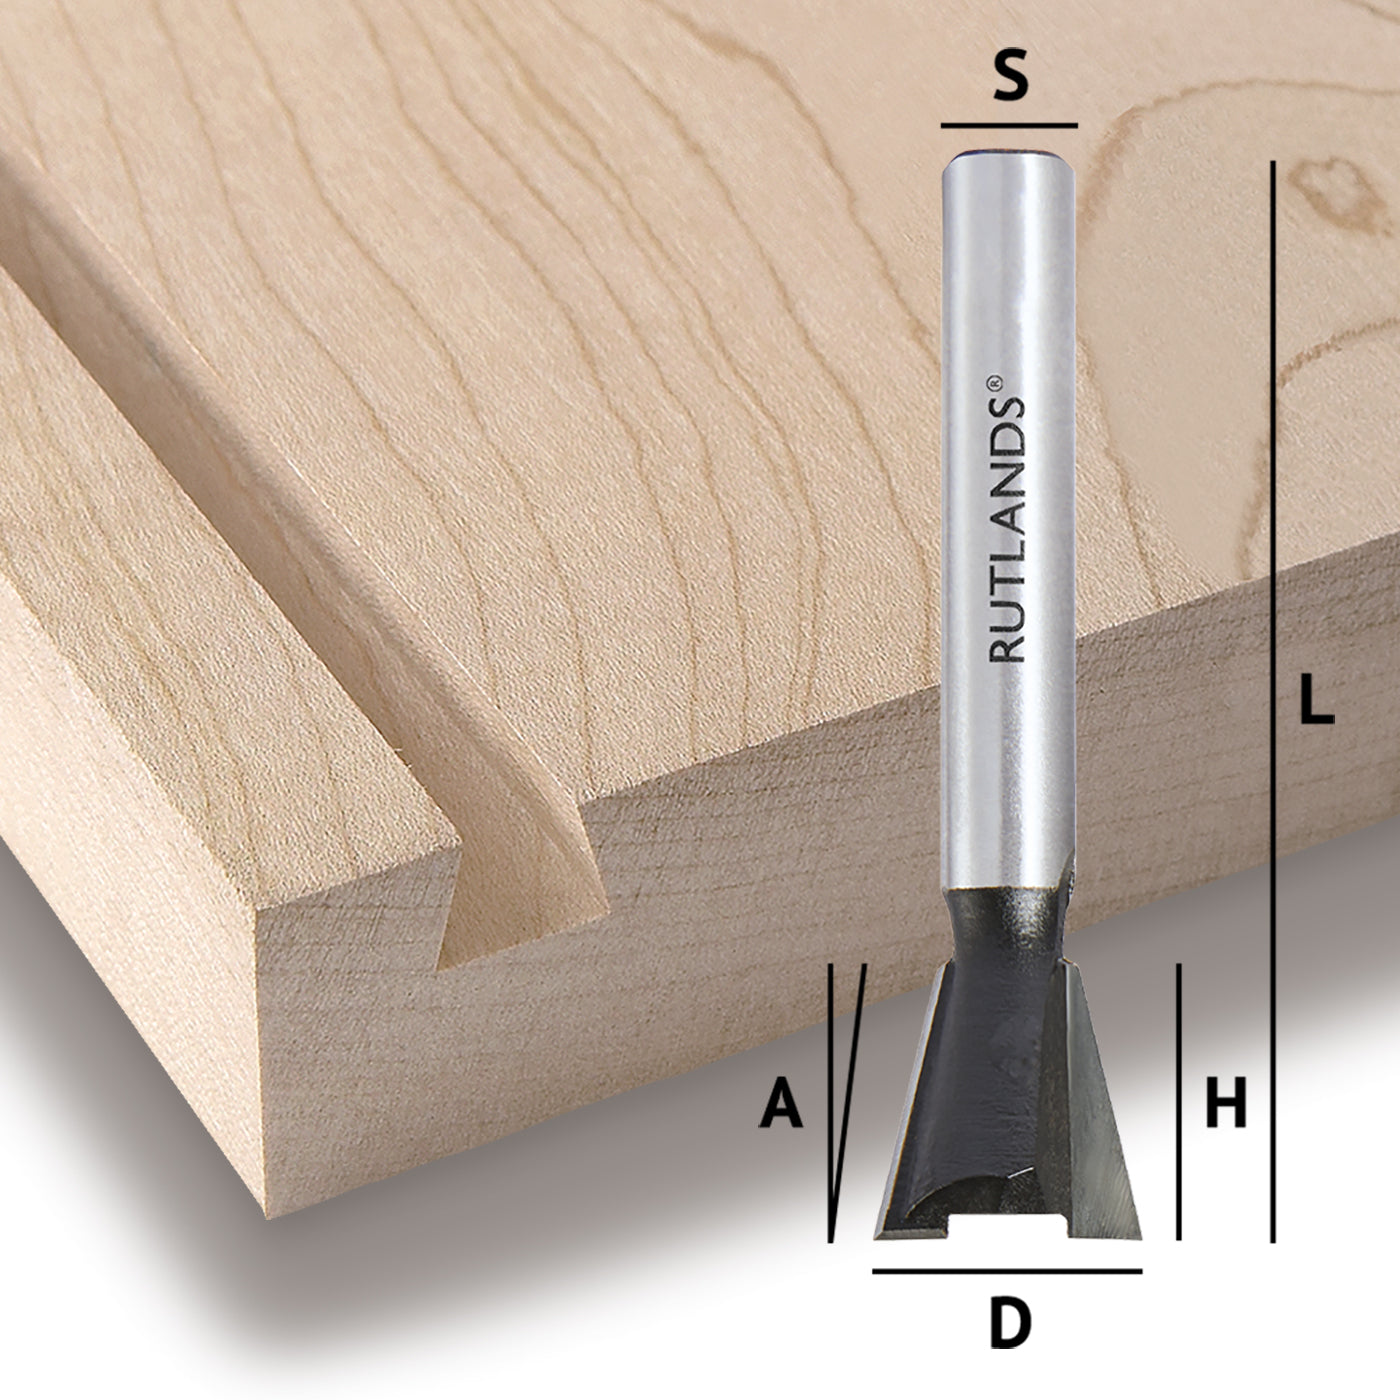 Router Bit - Dovetail for Staircase Jigs